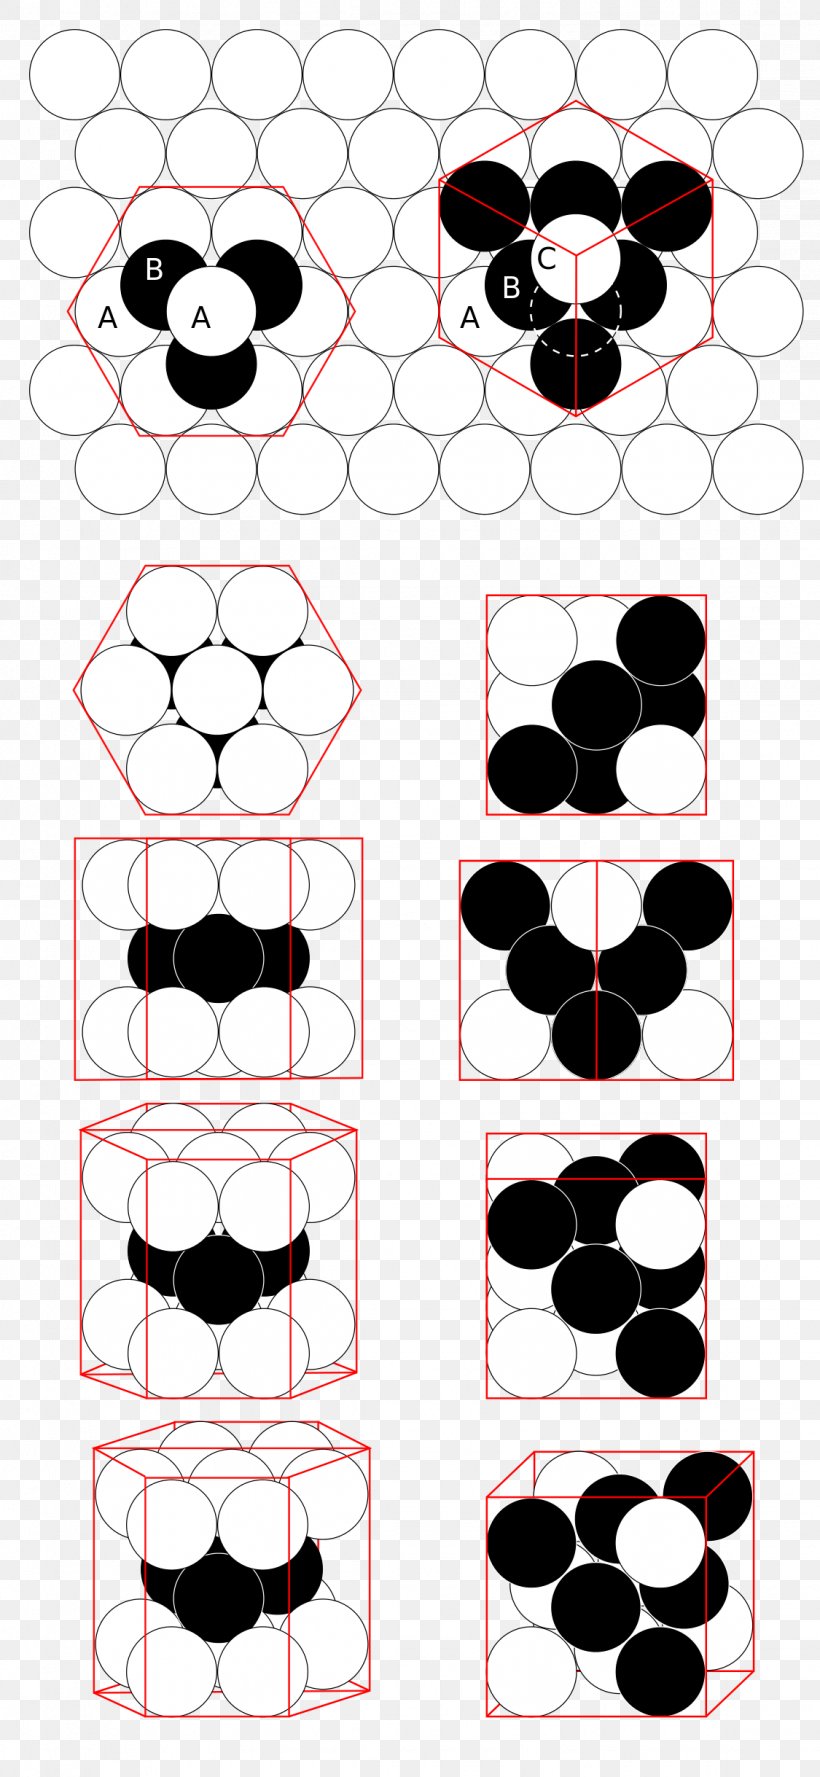 Close-packing Of Equal Spheres Packing Problems Sphere Packing Cubic Crystal System Atomic Packing Factor, PNG, 1125x2438px, Closepacking Of Equal Spheres, Area, Atomic Packing Factor, Black, Black And White Download Free